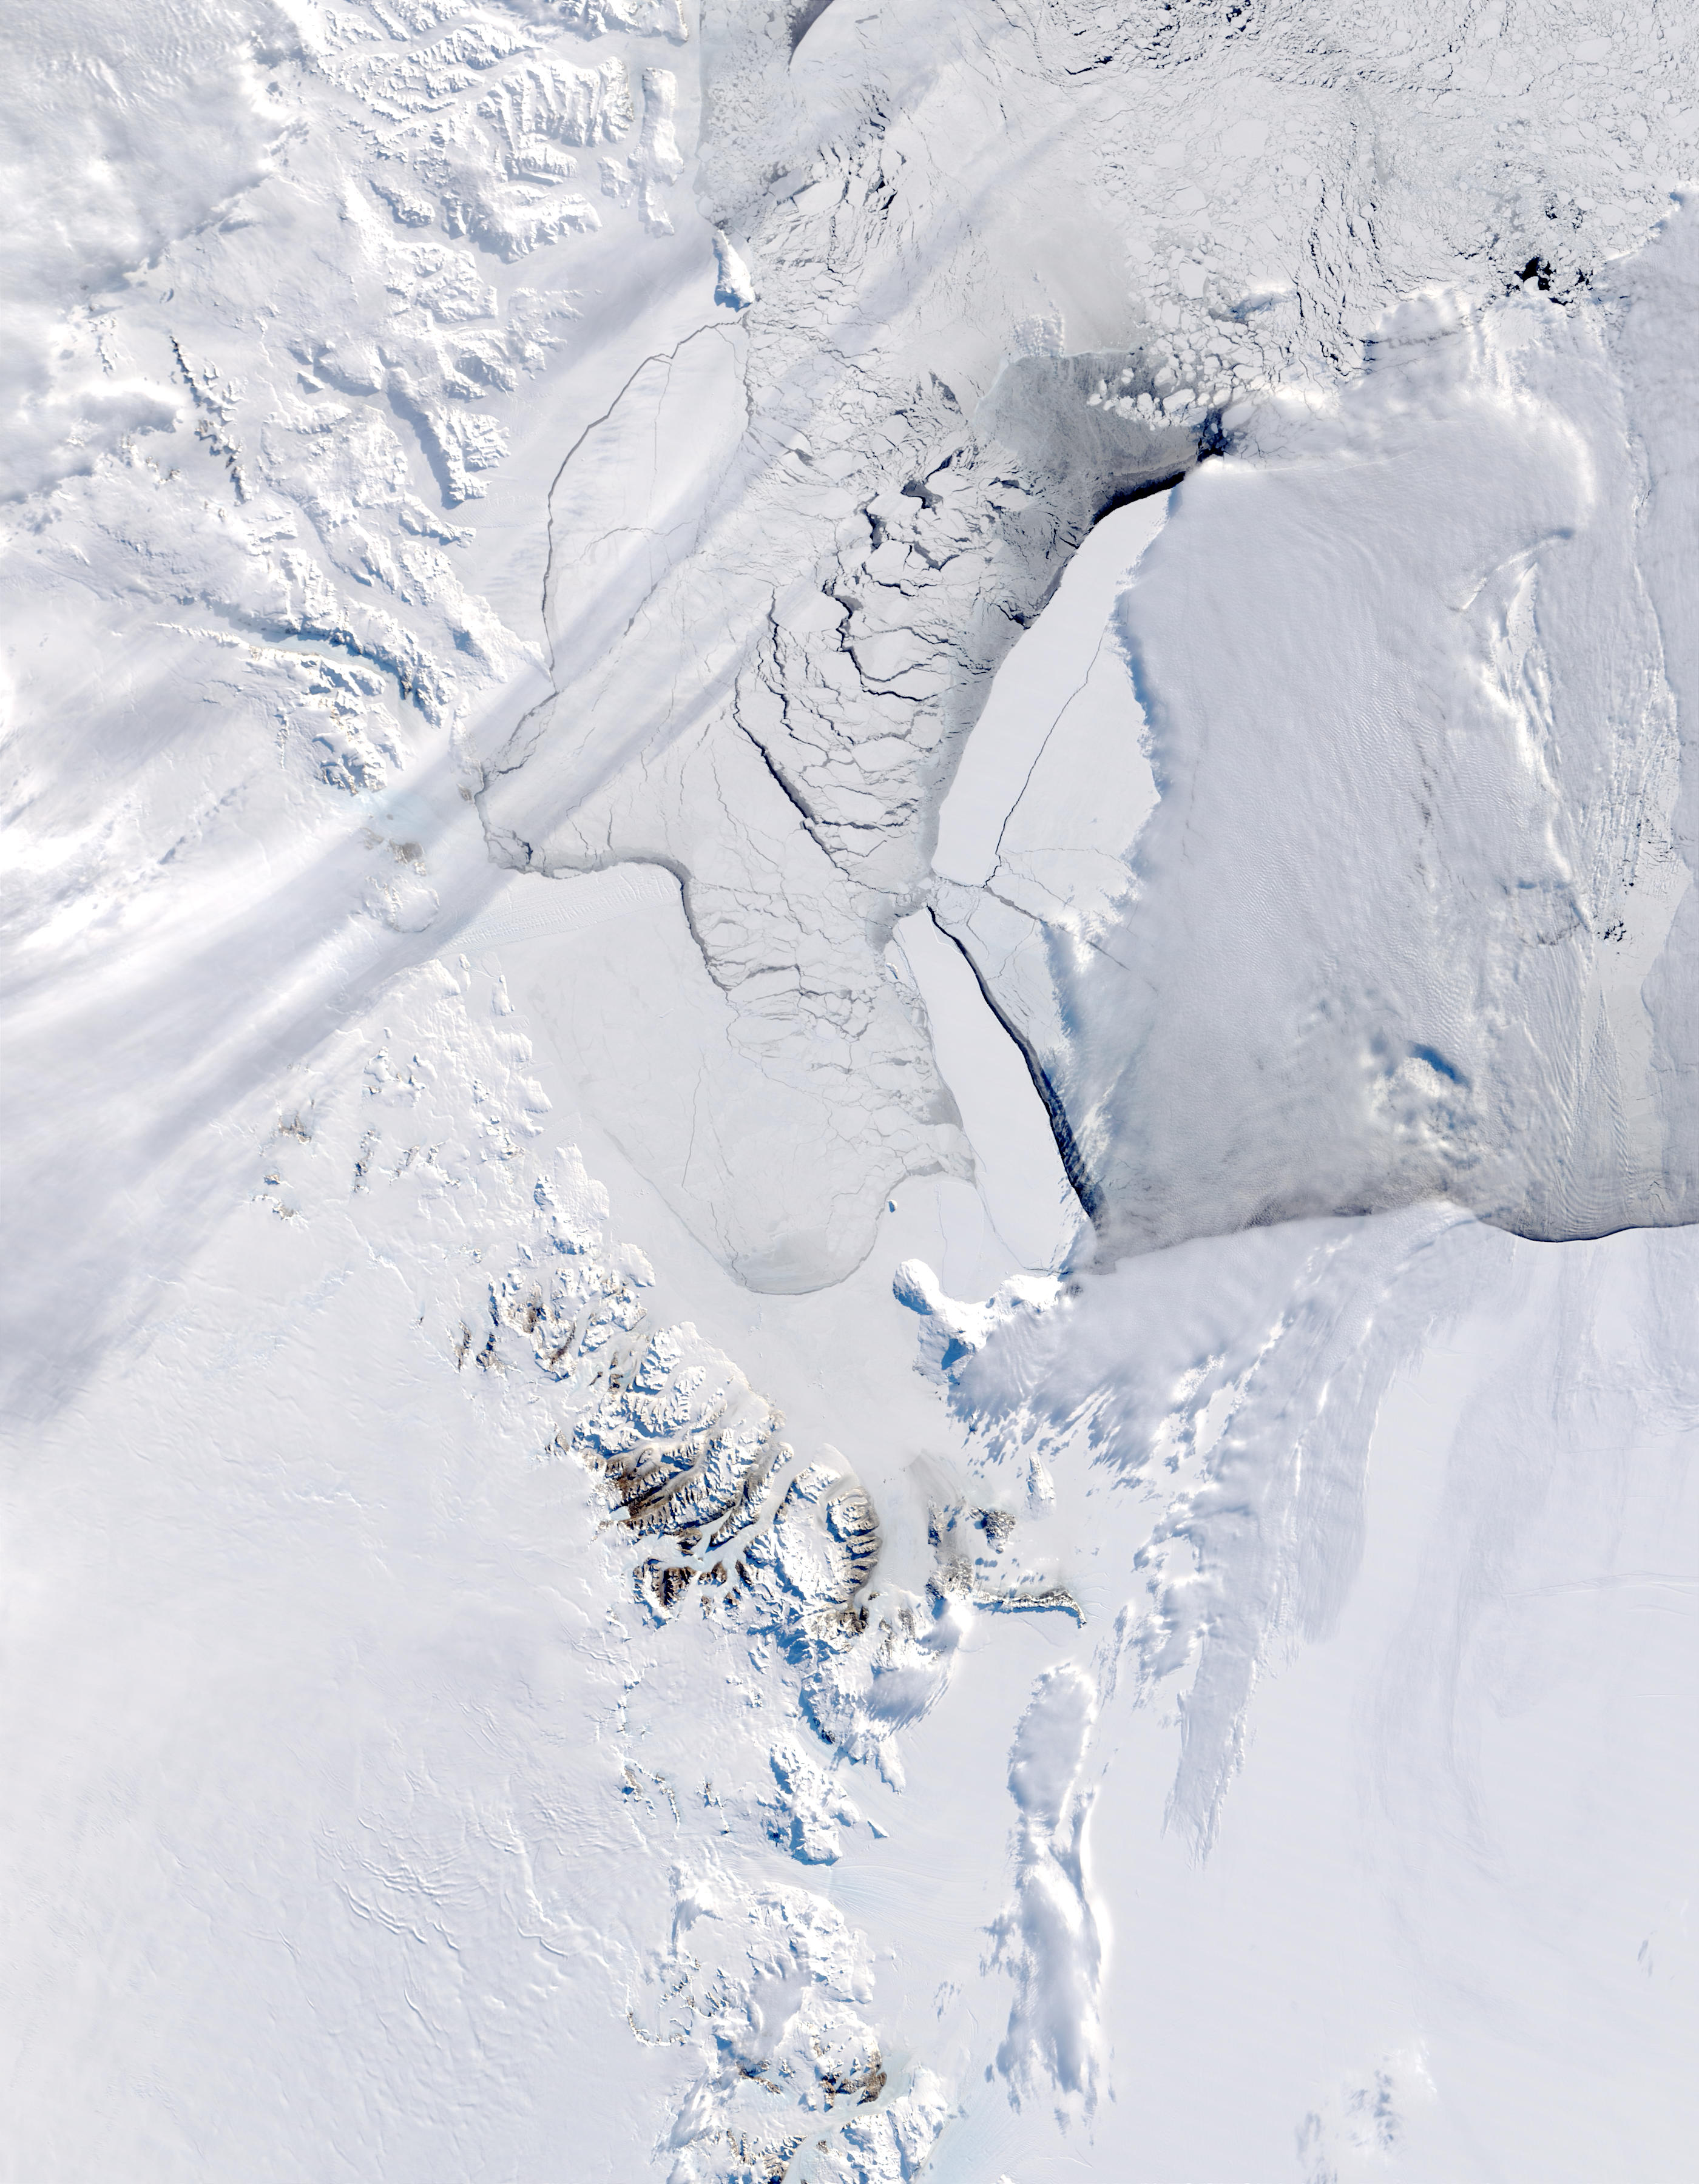 C-16, C-19 and B-15A icebergs in the Ross Sea, Antarctica - related image preview